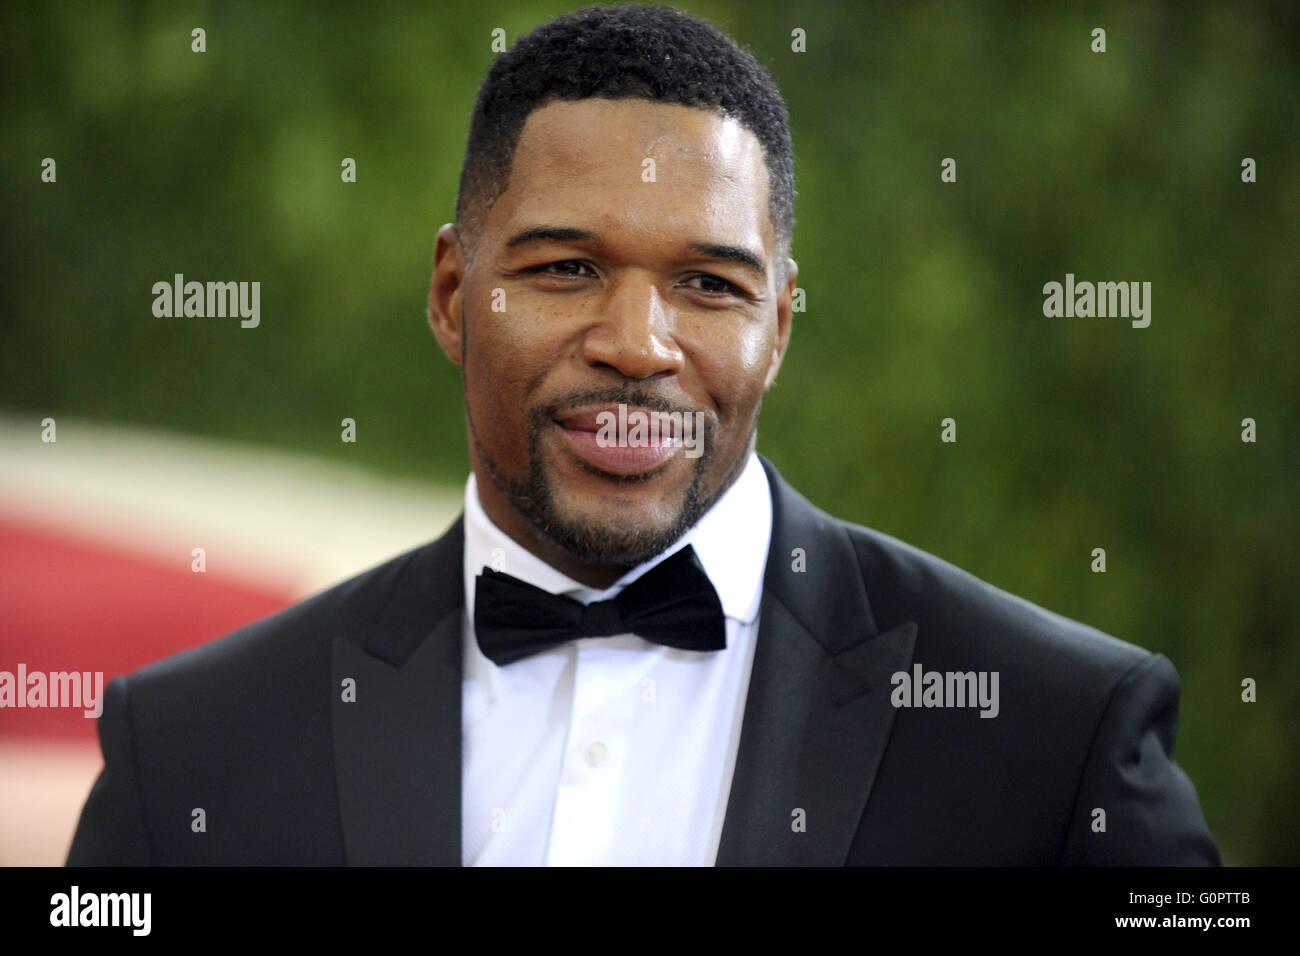 Michael Strahan attending the 'Manus x Machina: Fashion In An Age Of Technology' Costume Institute Gala at Metropolitan Museum of Art on May 2, 2016 in New York City. | usage worldwide Stock Photo